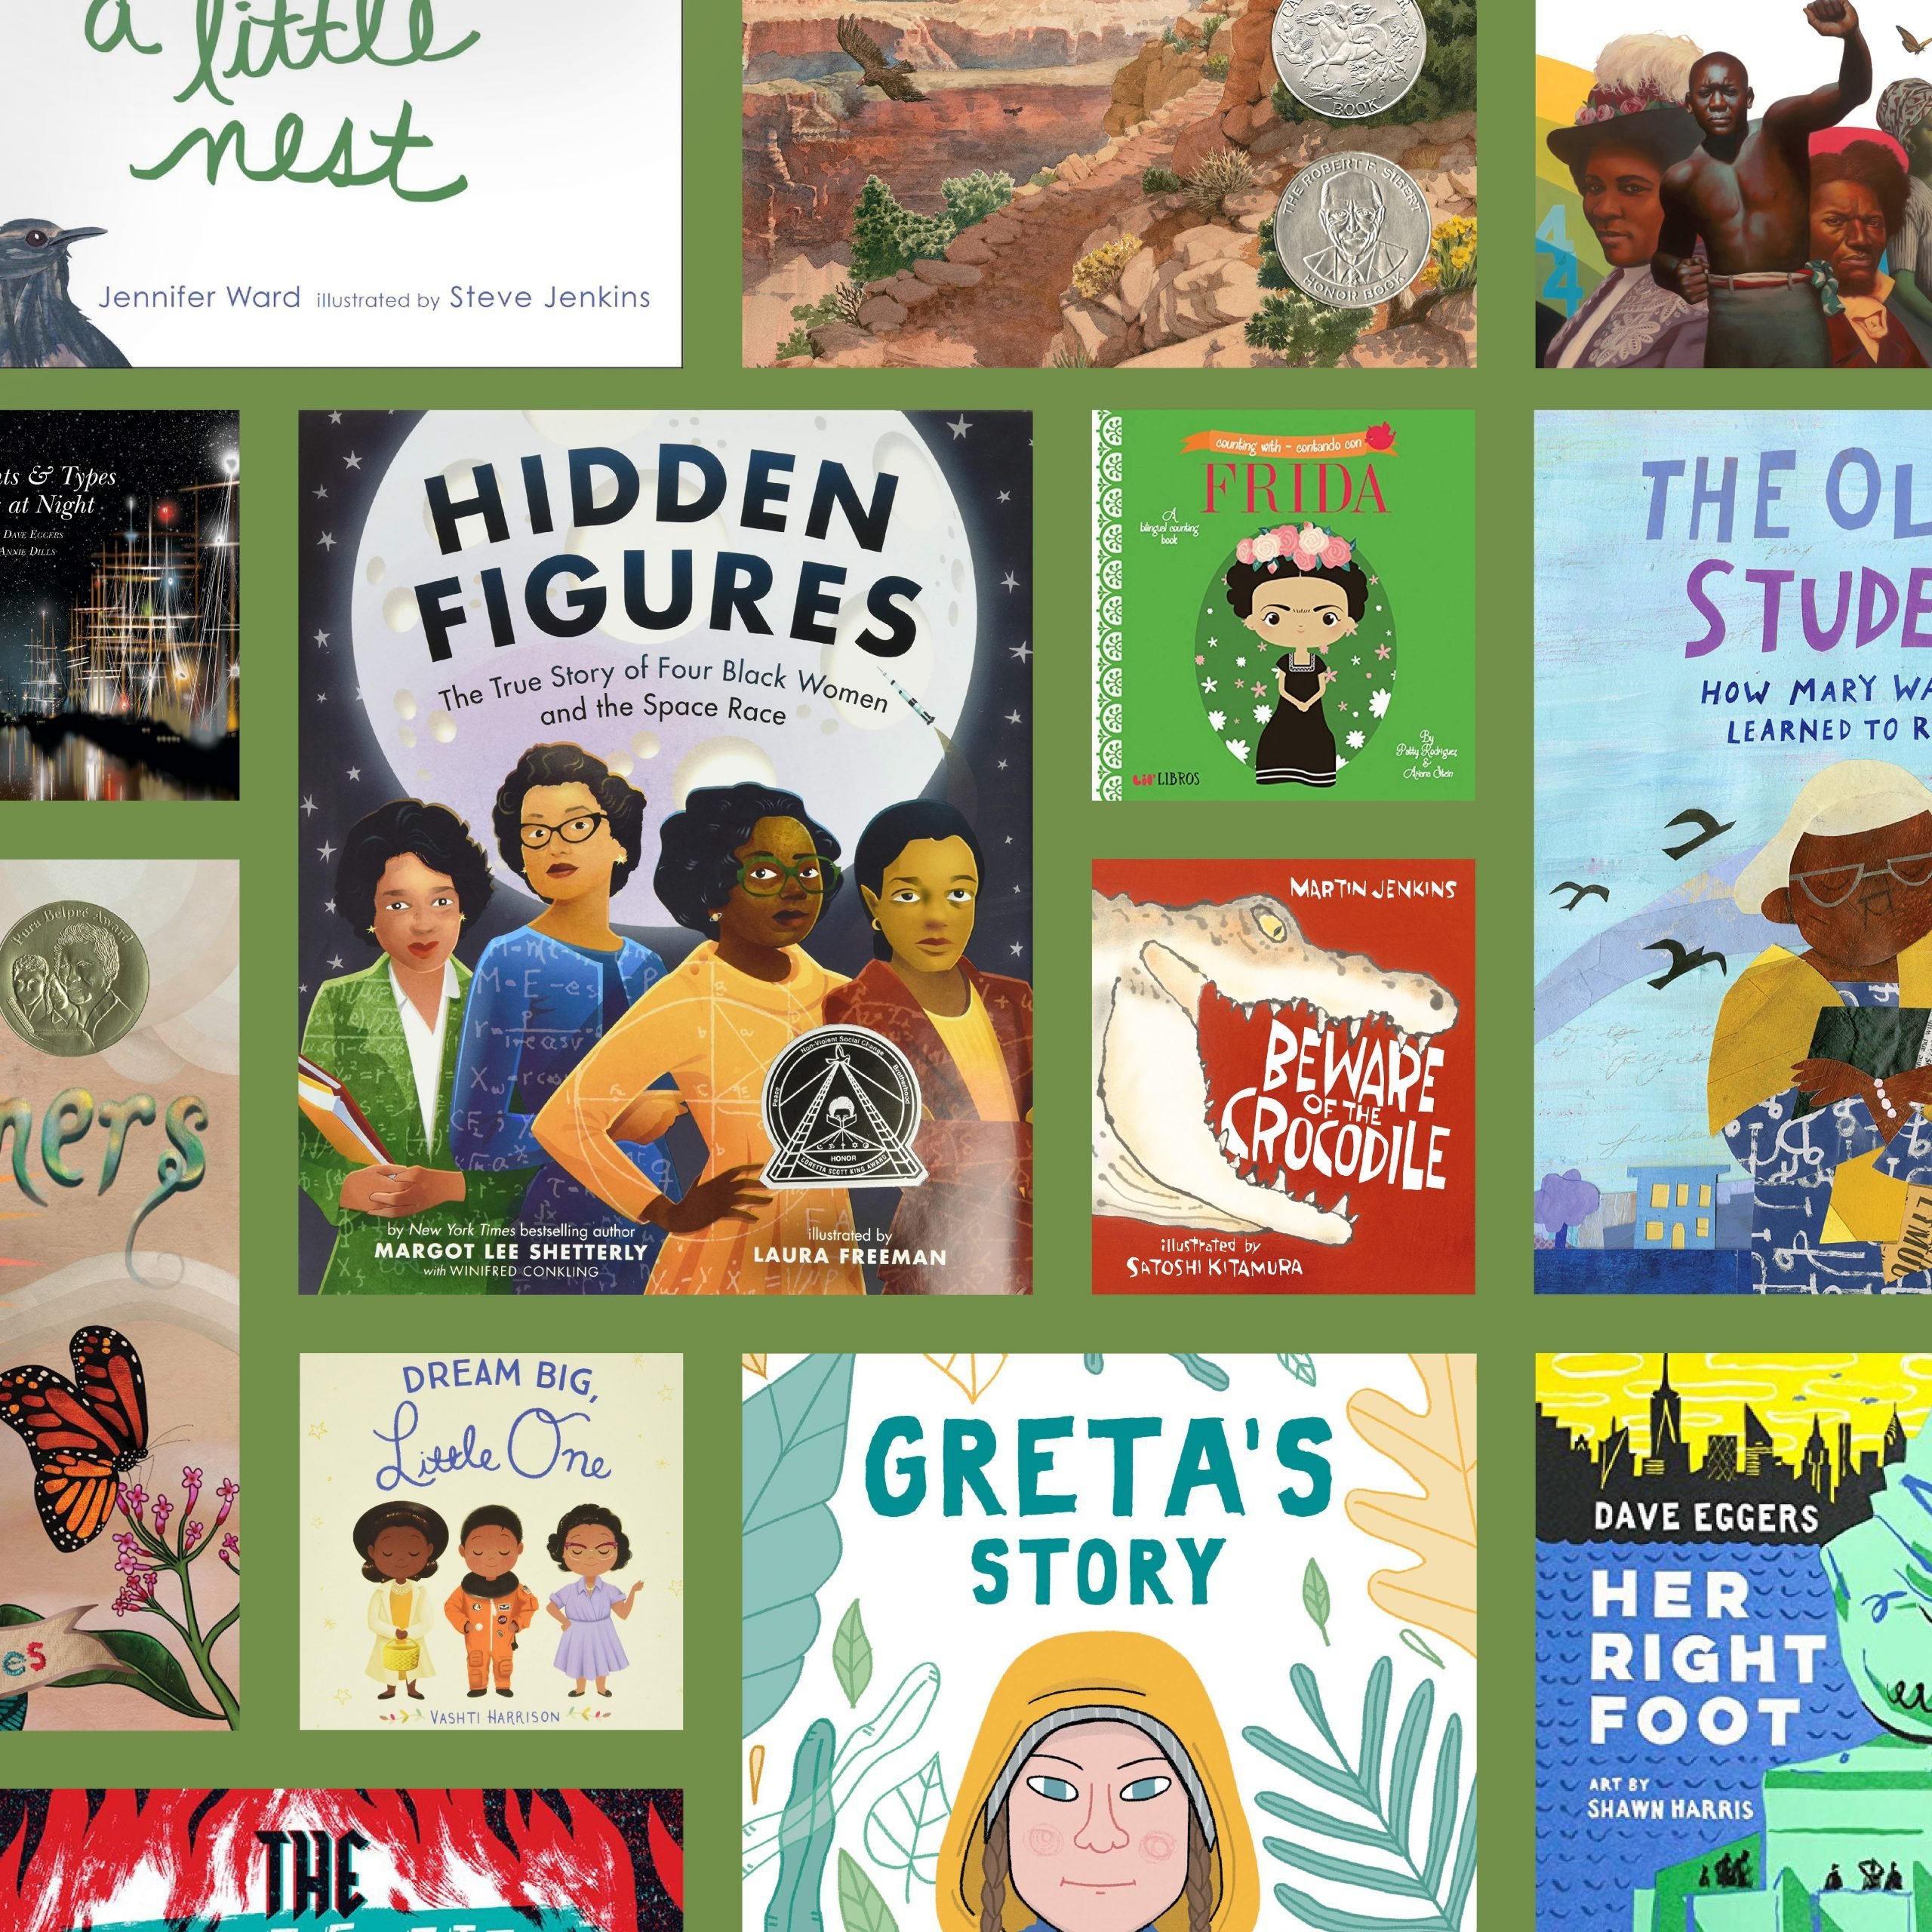 20 Best Nonfiction Books for Kids 2022 | Top-Rated Nonfiction for All Ages